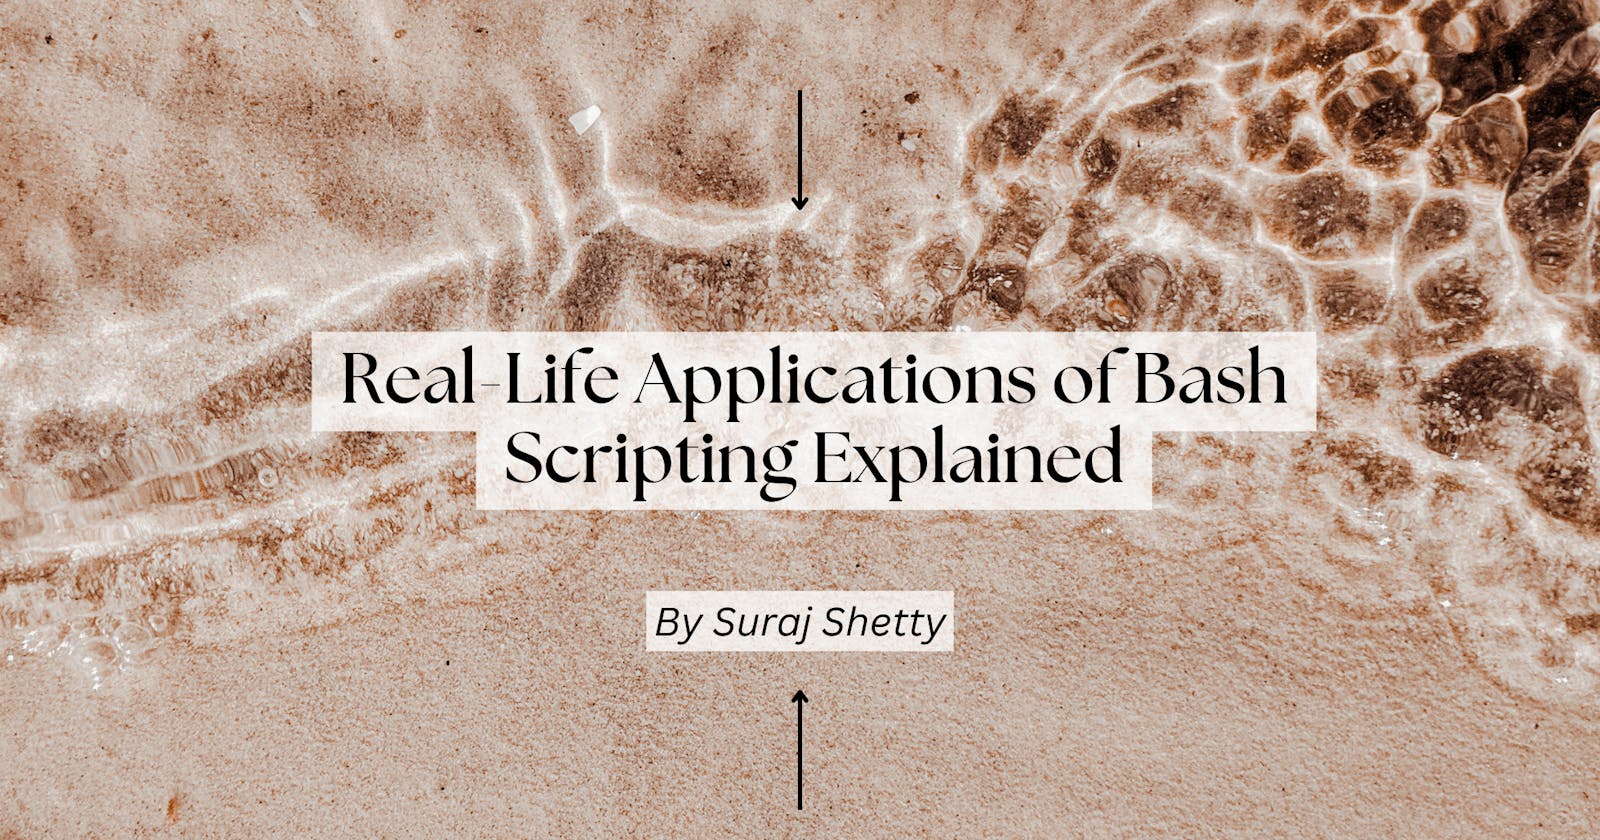 Real-Life Applications of Bash Scripting Explained